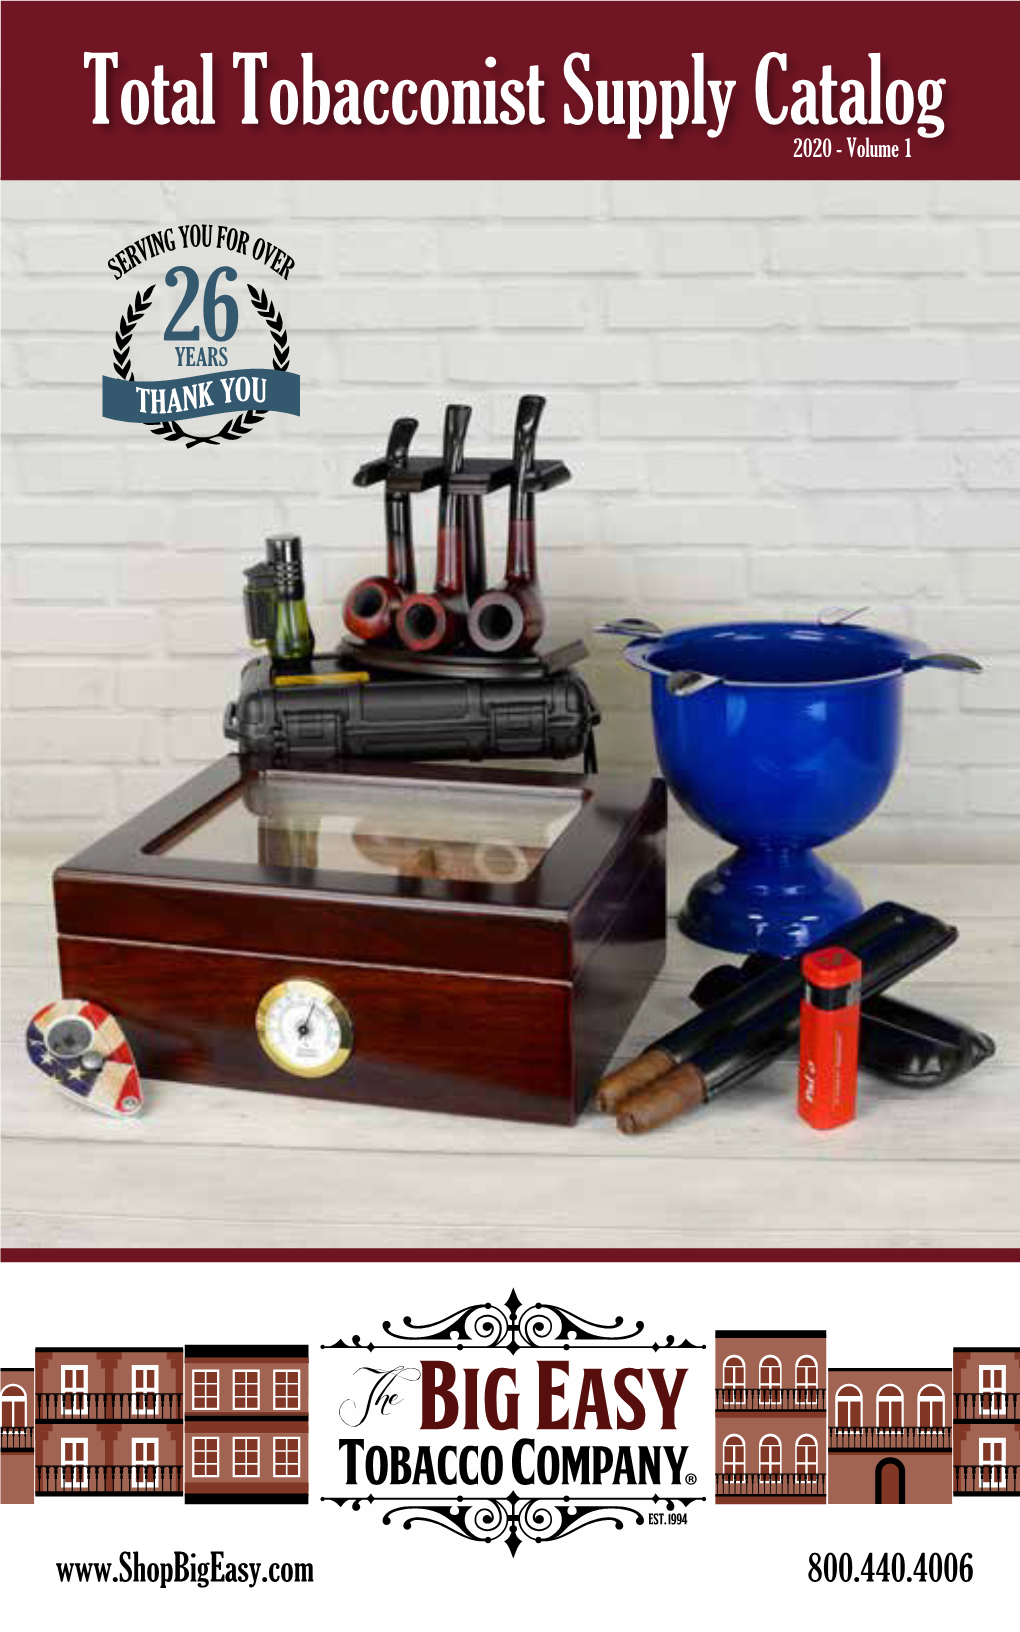 Total Tobacconist Supply Catalog 2020 - Volume 1 26 YEARS